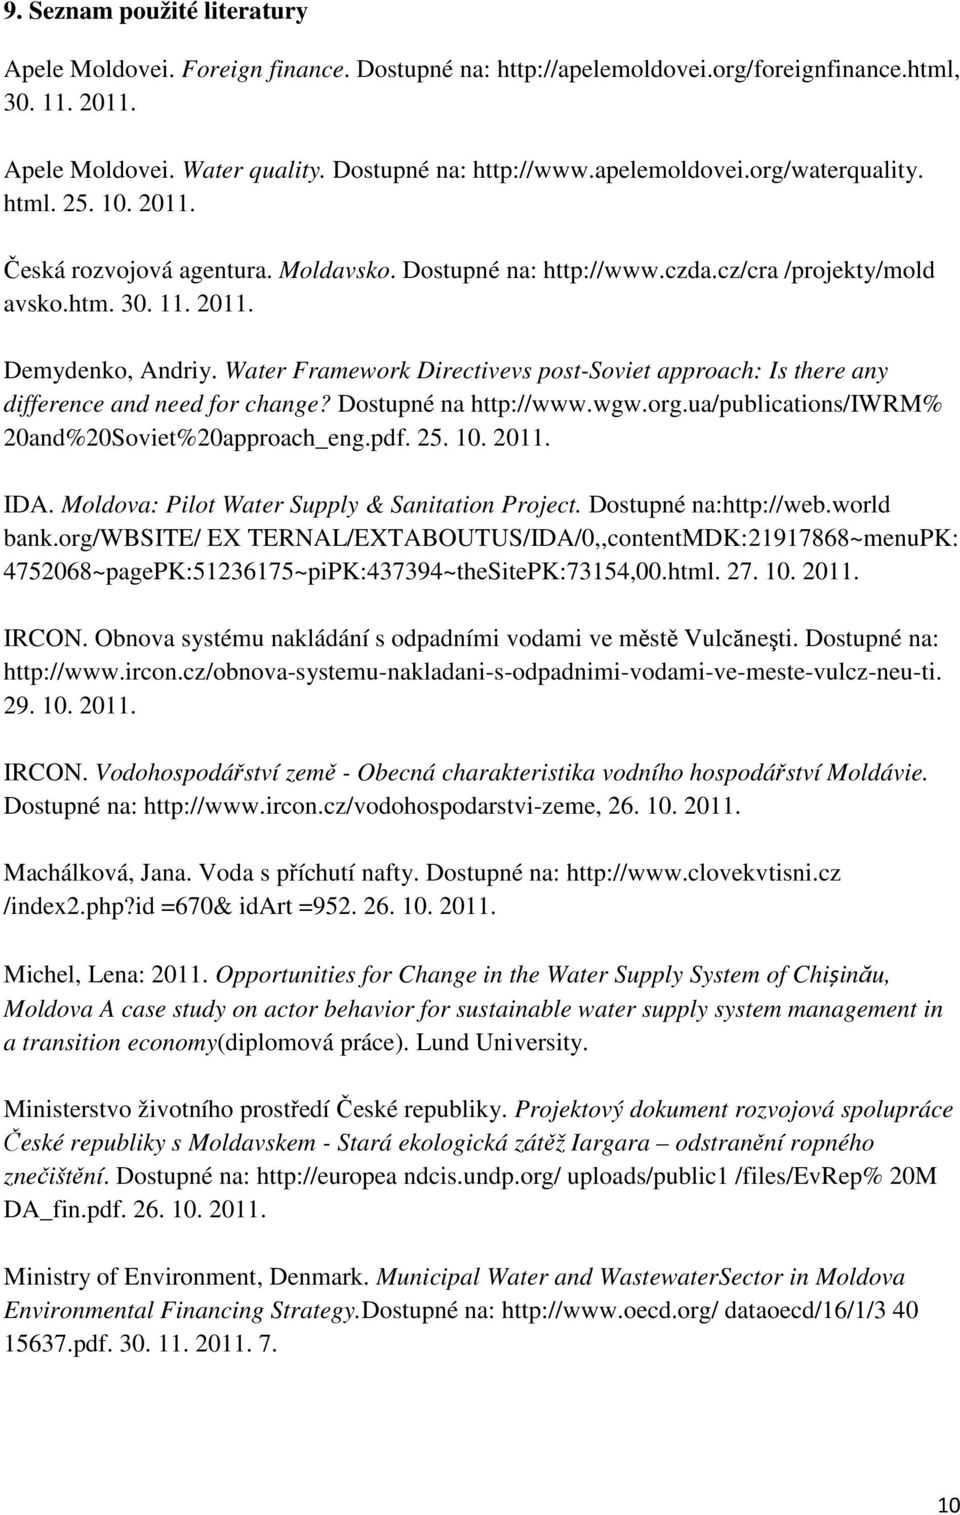 Water Framework Directivevs post-soviet approach: Is there any difference and need for change? Dostupné na http://www.wgw.org.ua/publications/iwrm% 20and%20Soviet%20approach_eng.pdf. 25. 10. 2011.